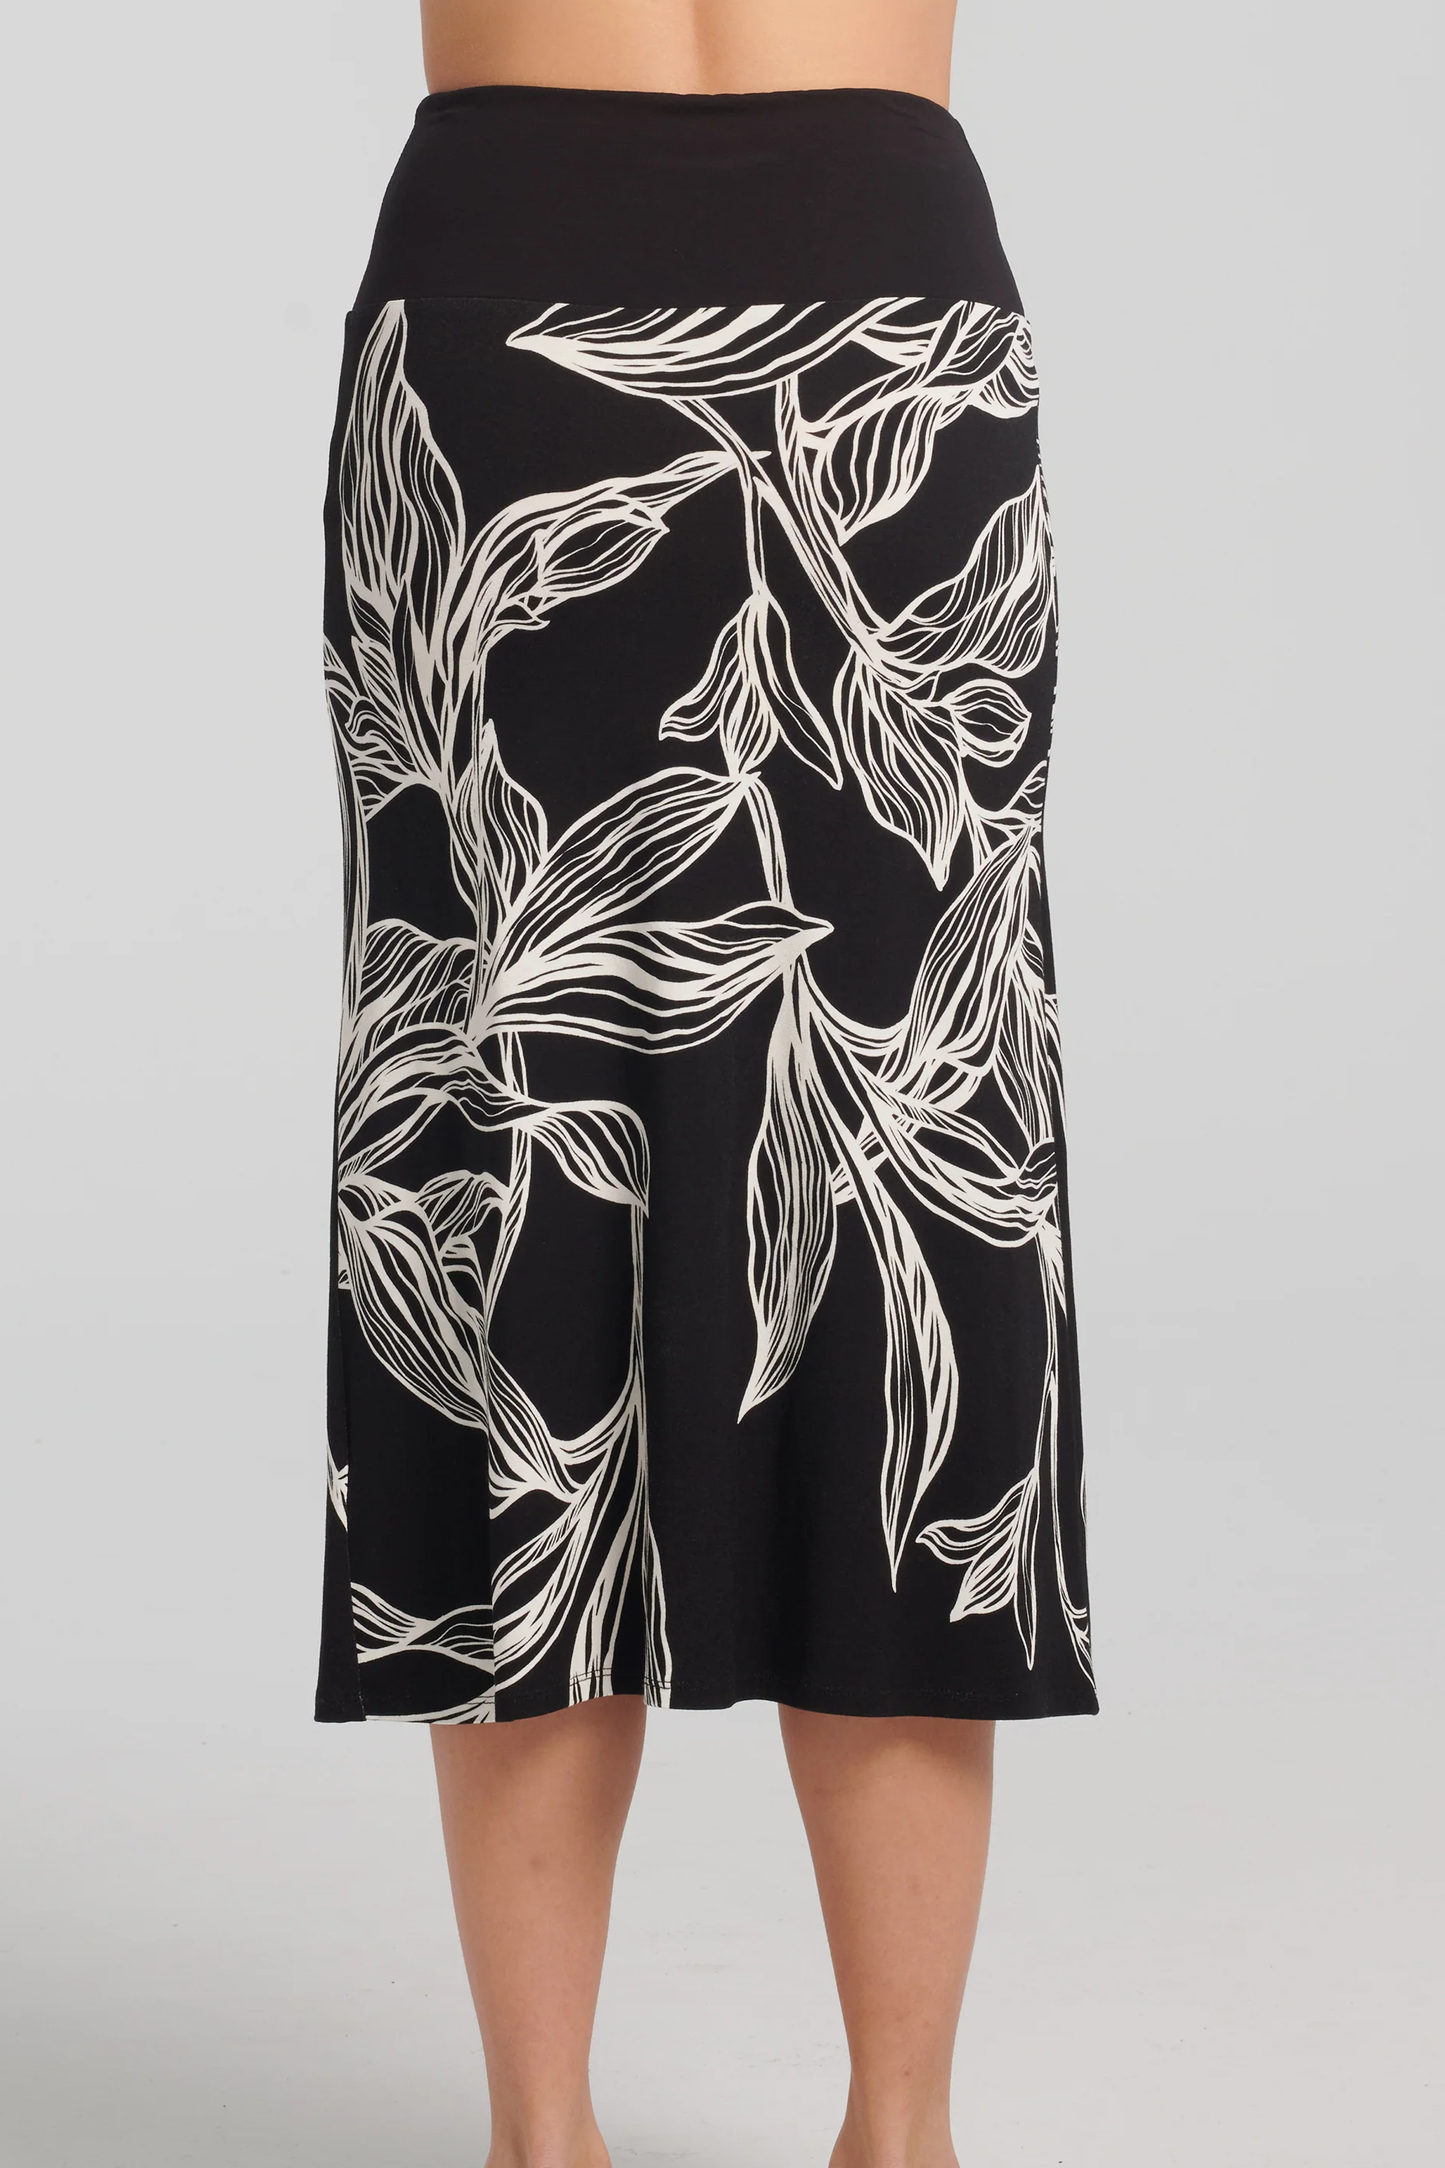 Ostara Skirt by Kollontai, Black and white leaf print, back view, solid black pull-on waistband, mid-calf length, slight A-line shape, sizes XS to XXL, made in Montreal 